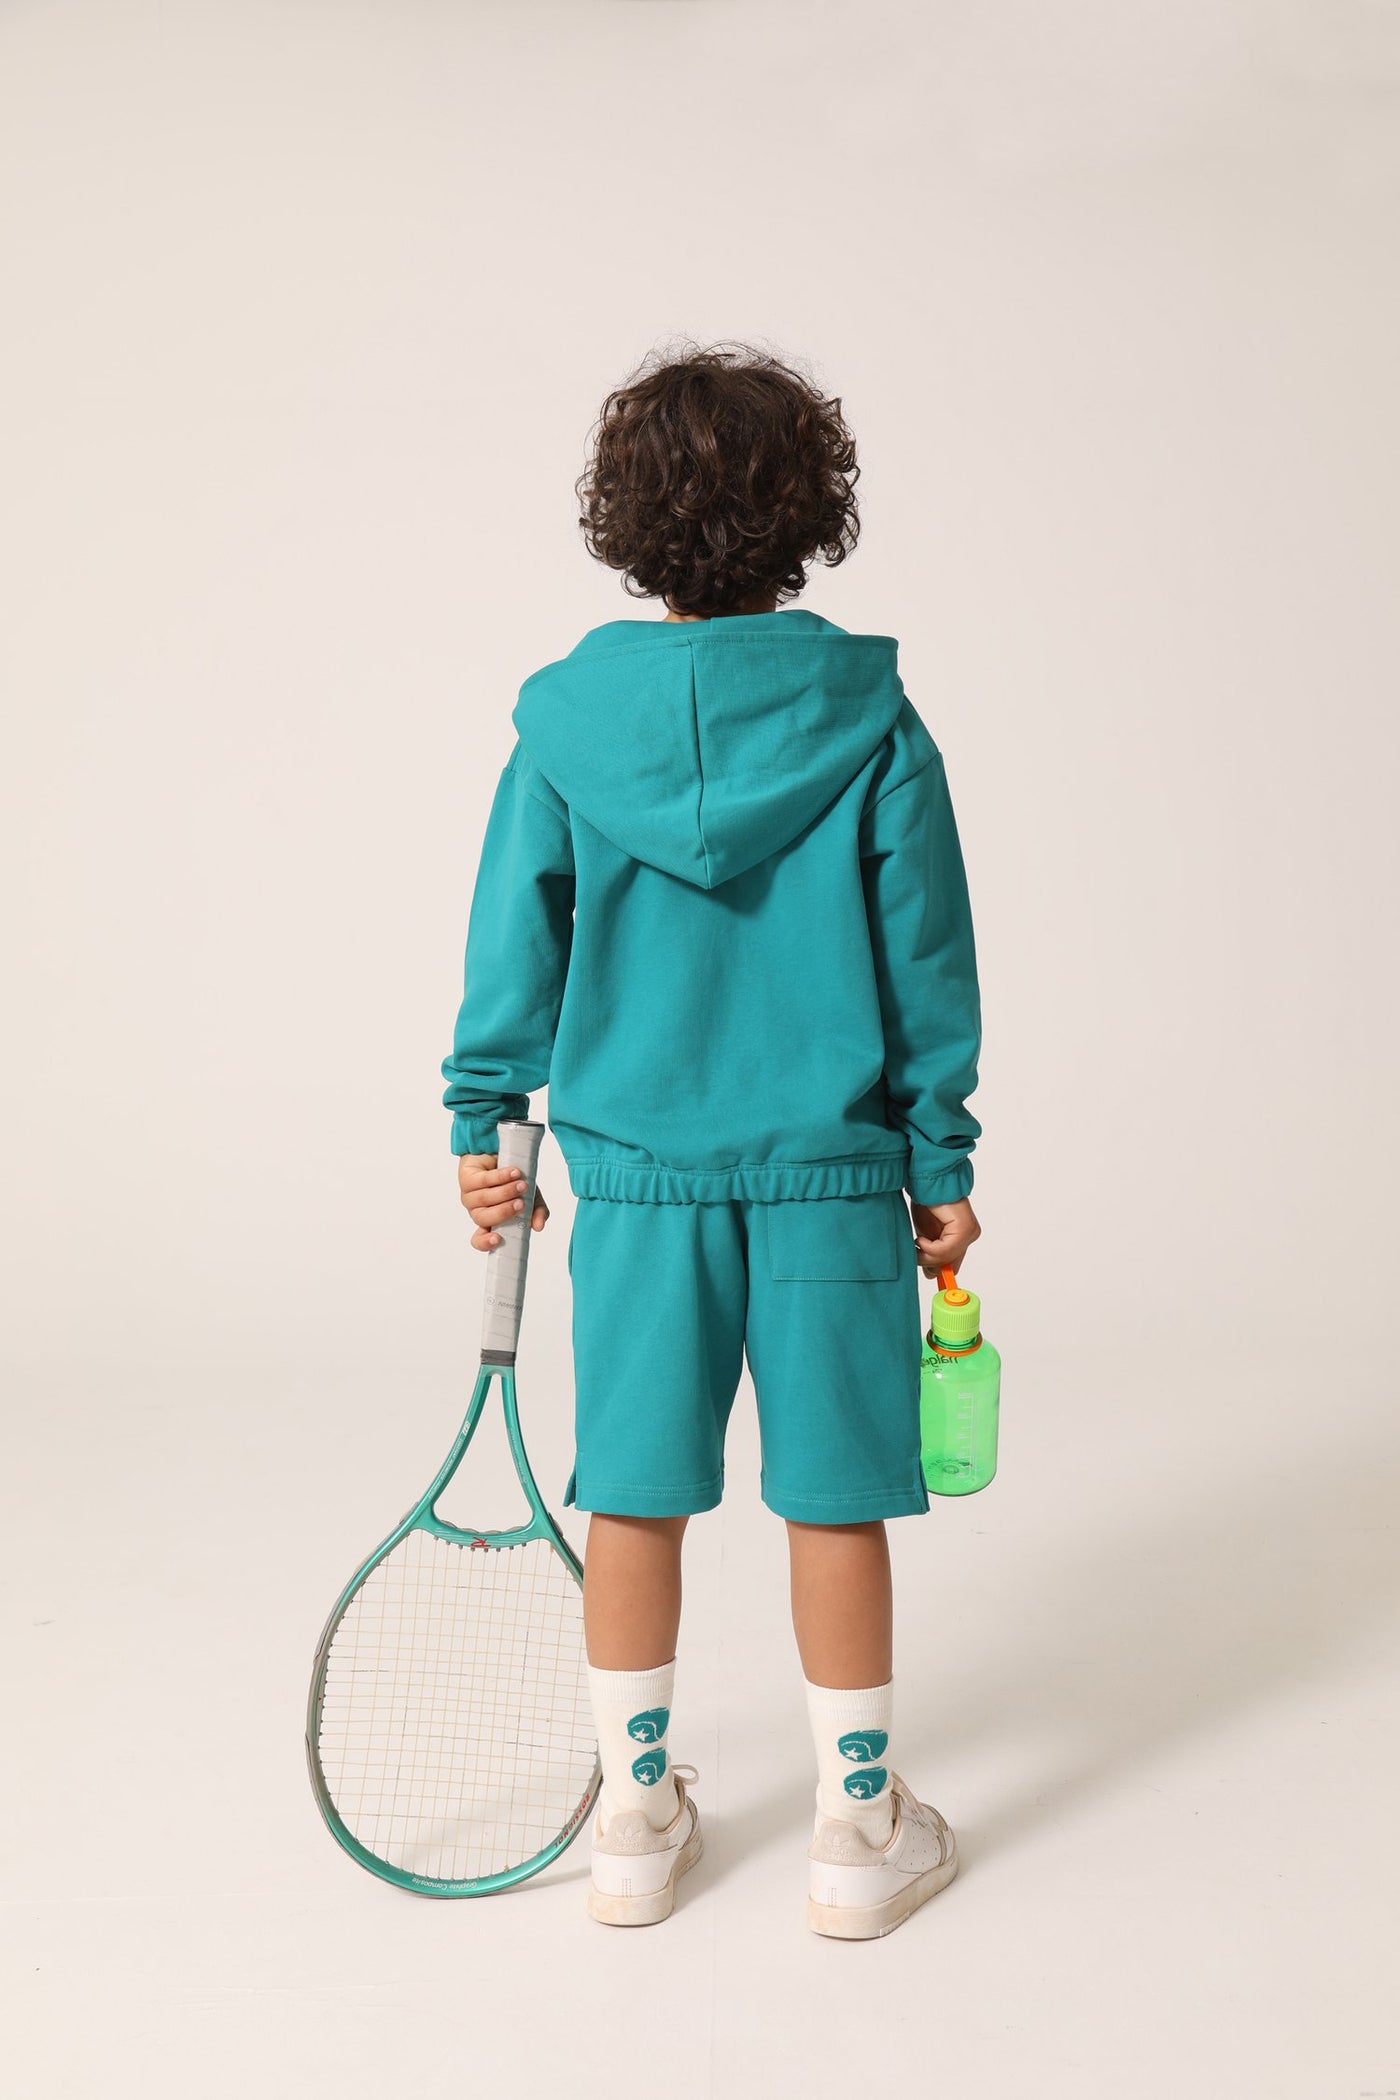 Tennis Classic Hooded Jacket